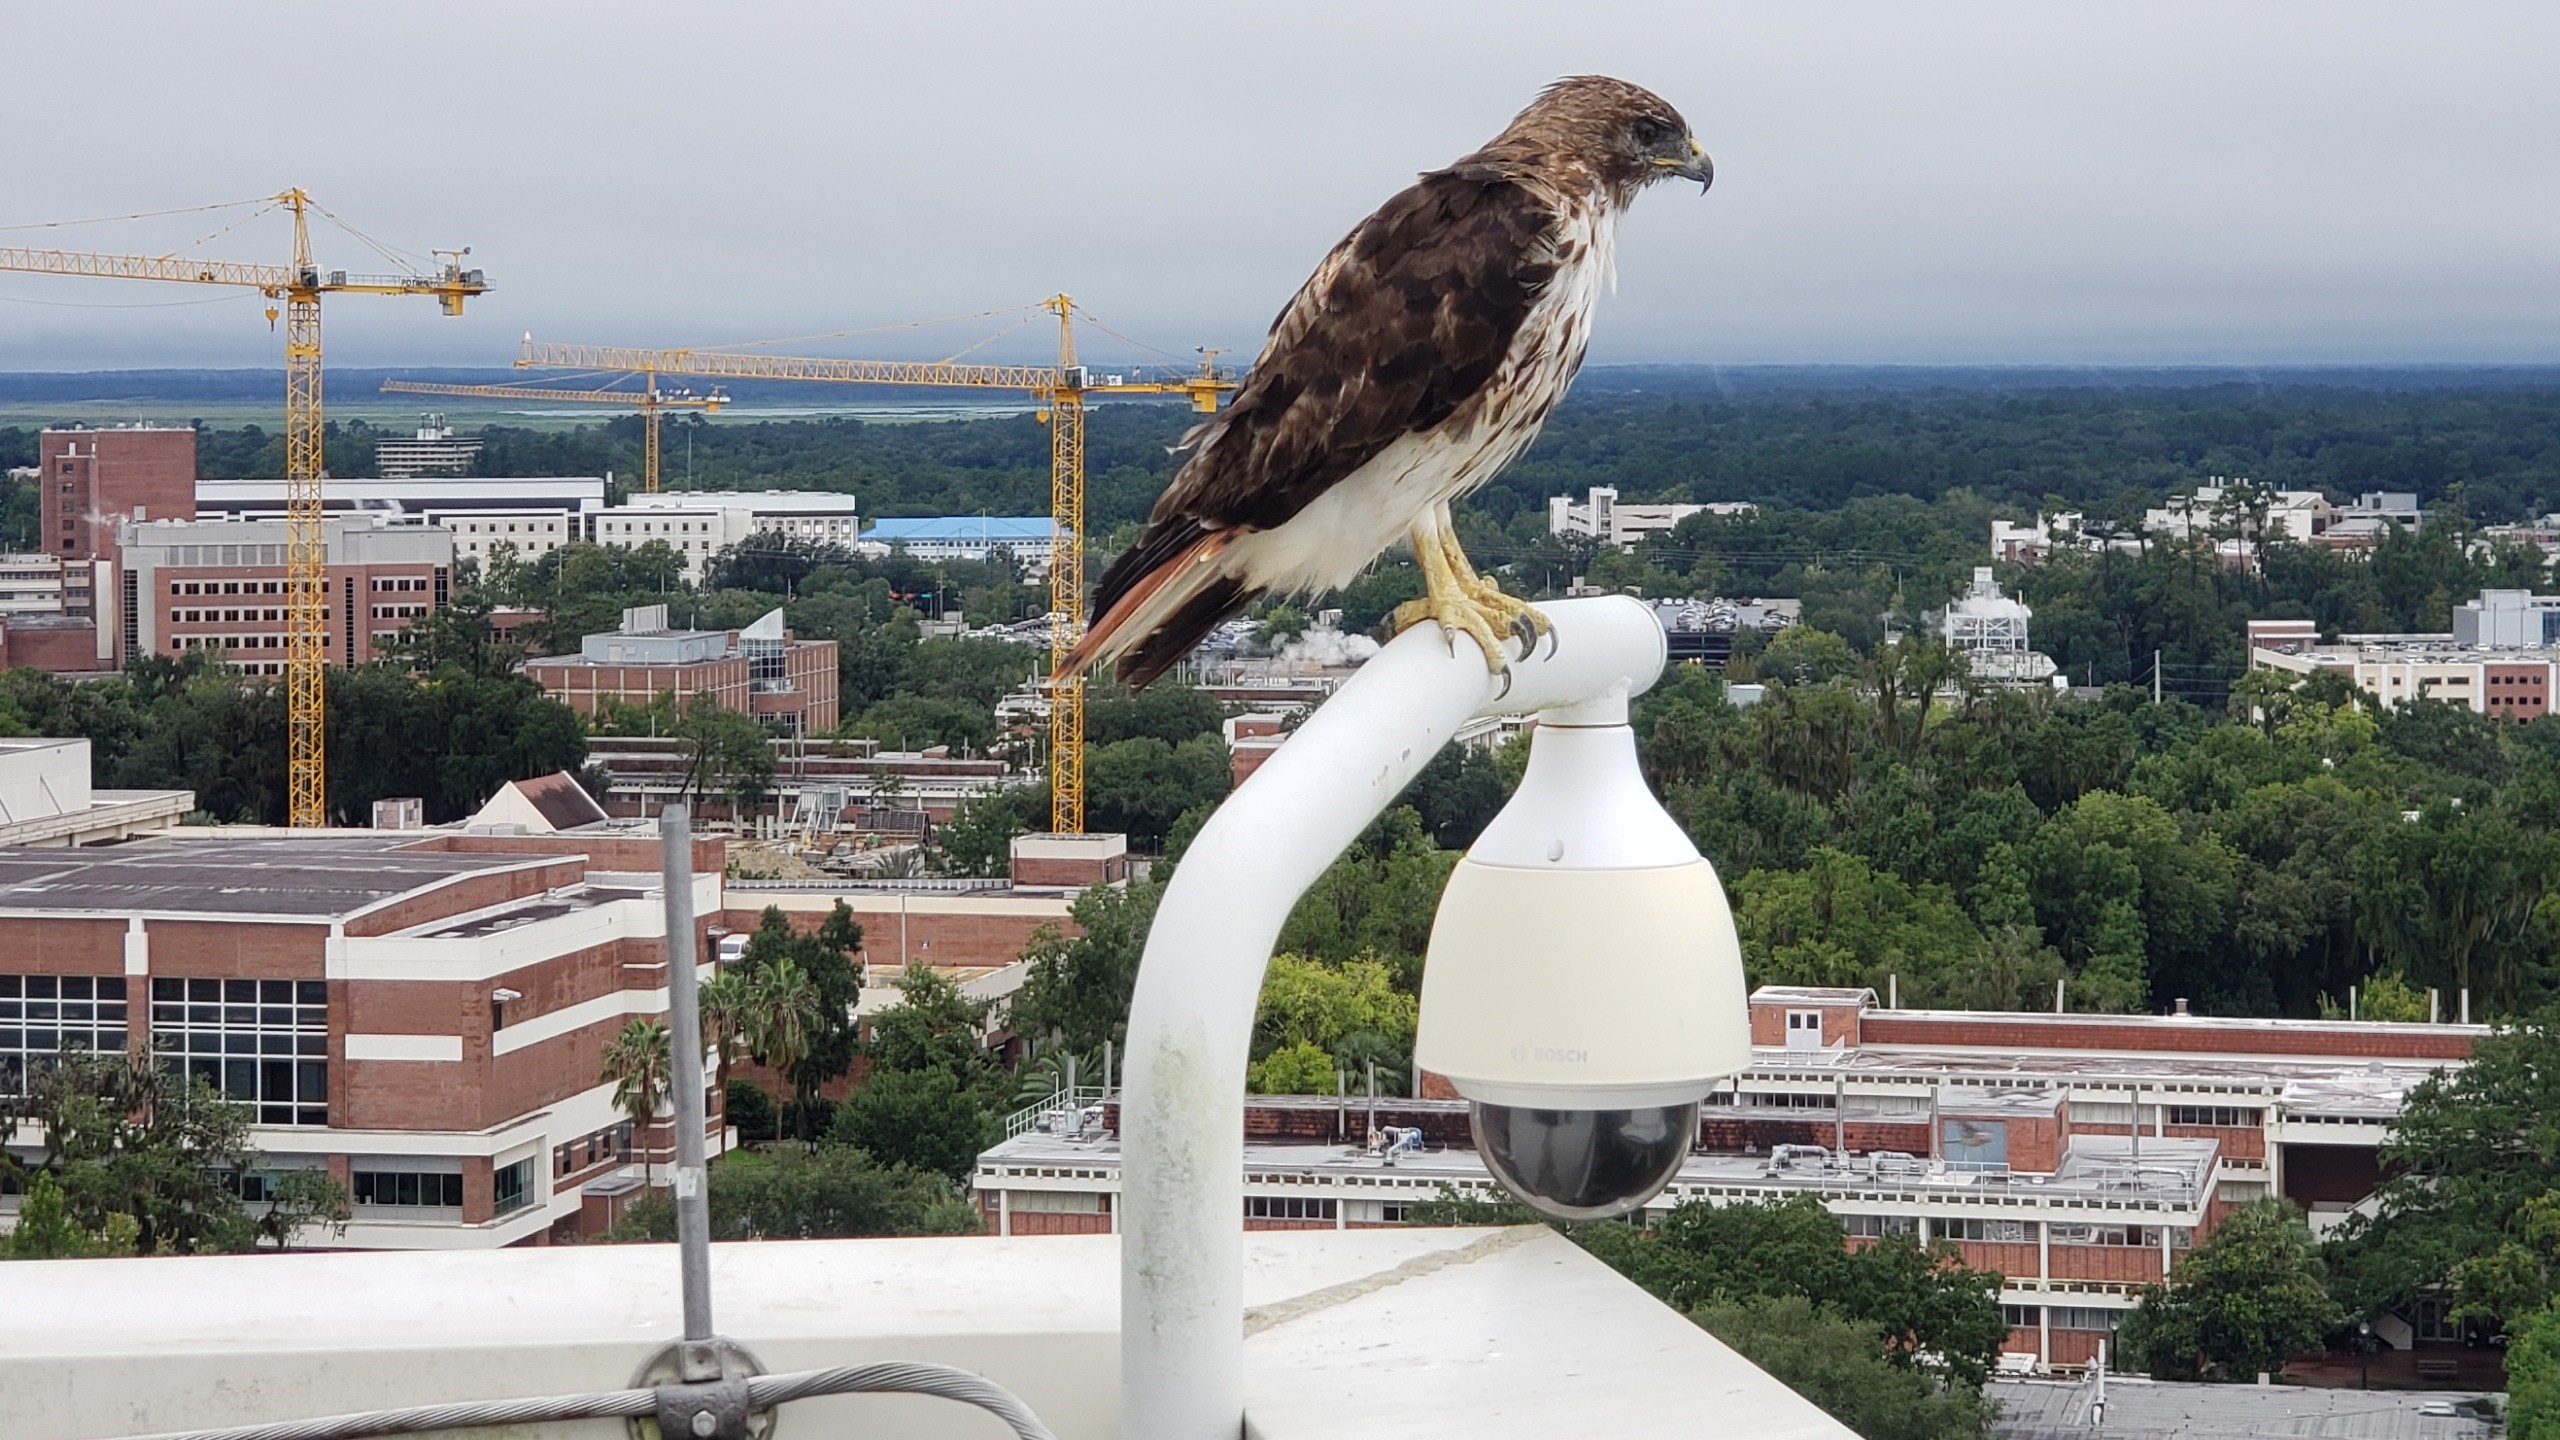 What do Red-Tailed Hawks Have in Common with Physical Security? 